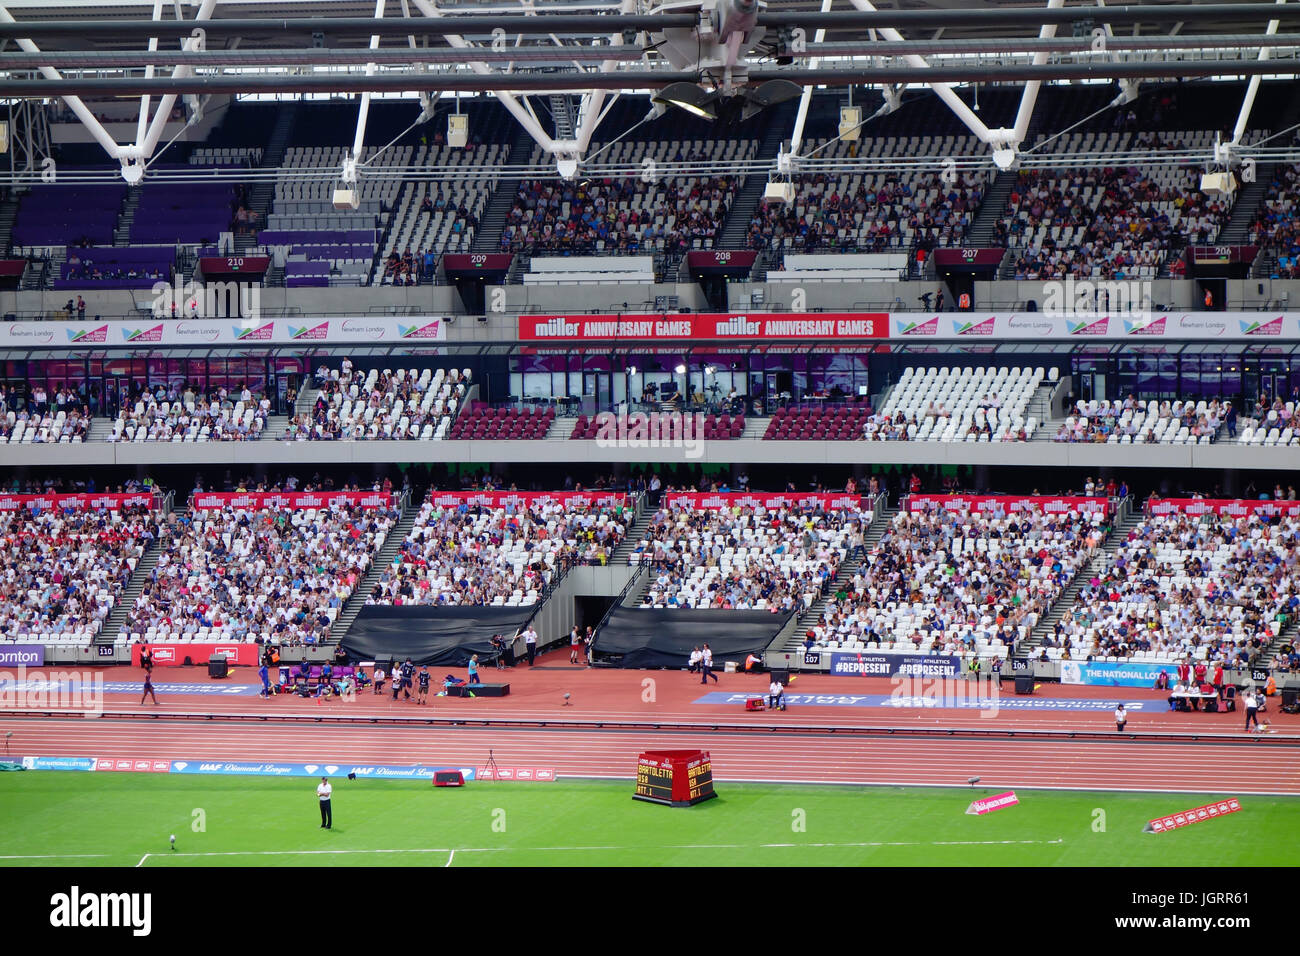 London Stadium, home of West Ham united football club in the Queen Elizabeth Olympic Park and venue for london 2017 world championships. Stock Photo